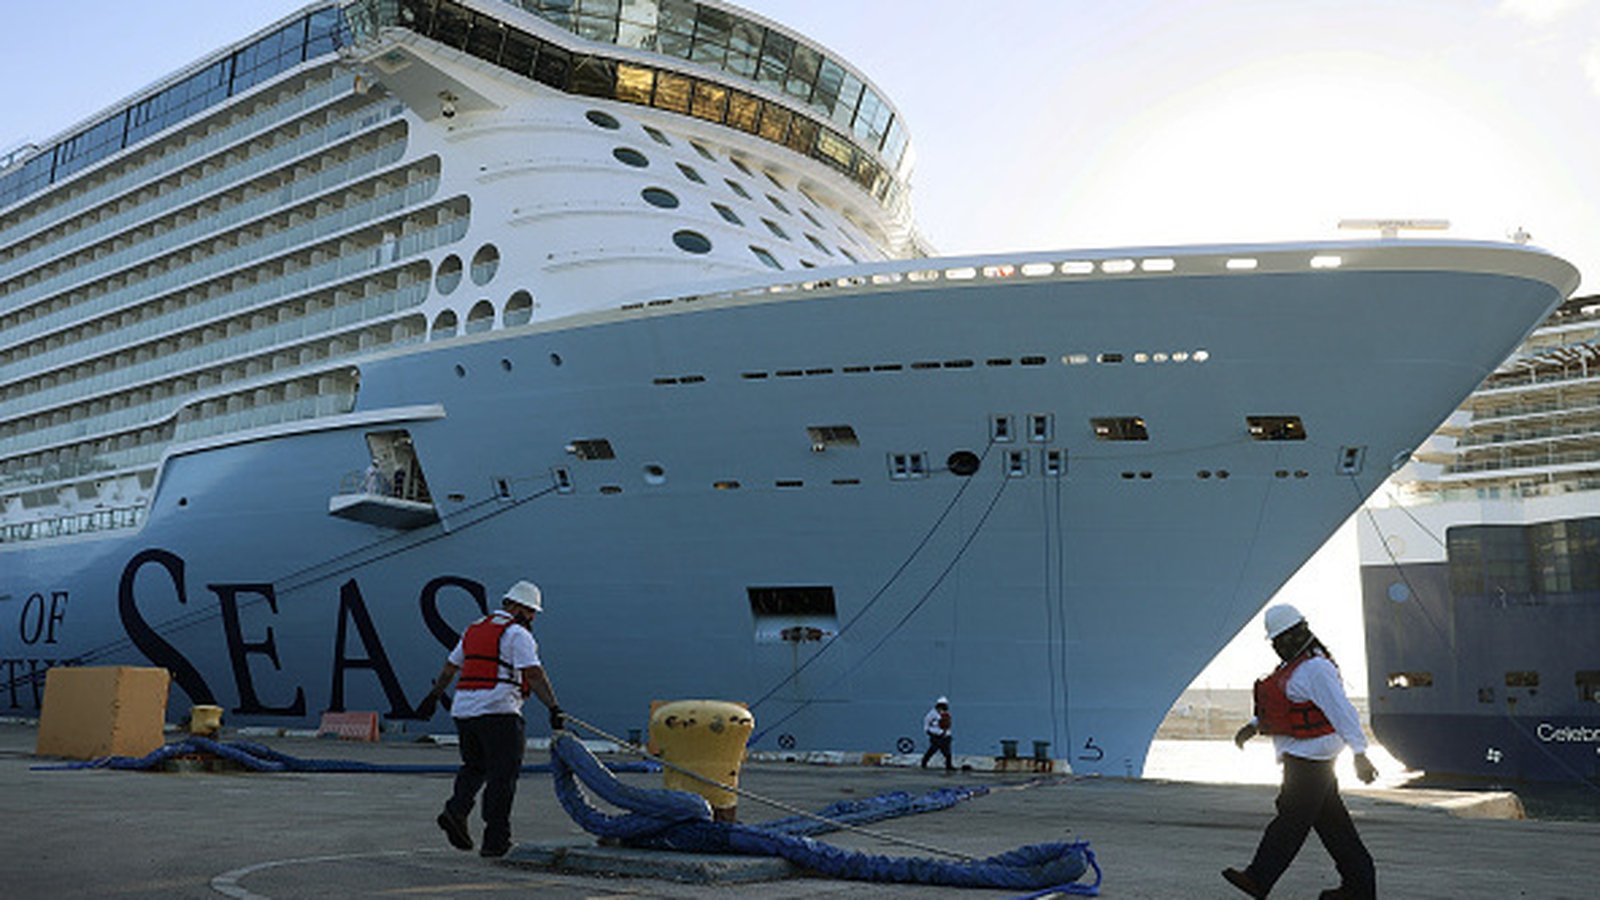 cruise ship docked because of covid